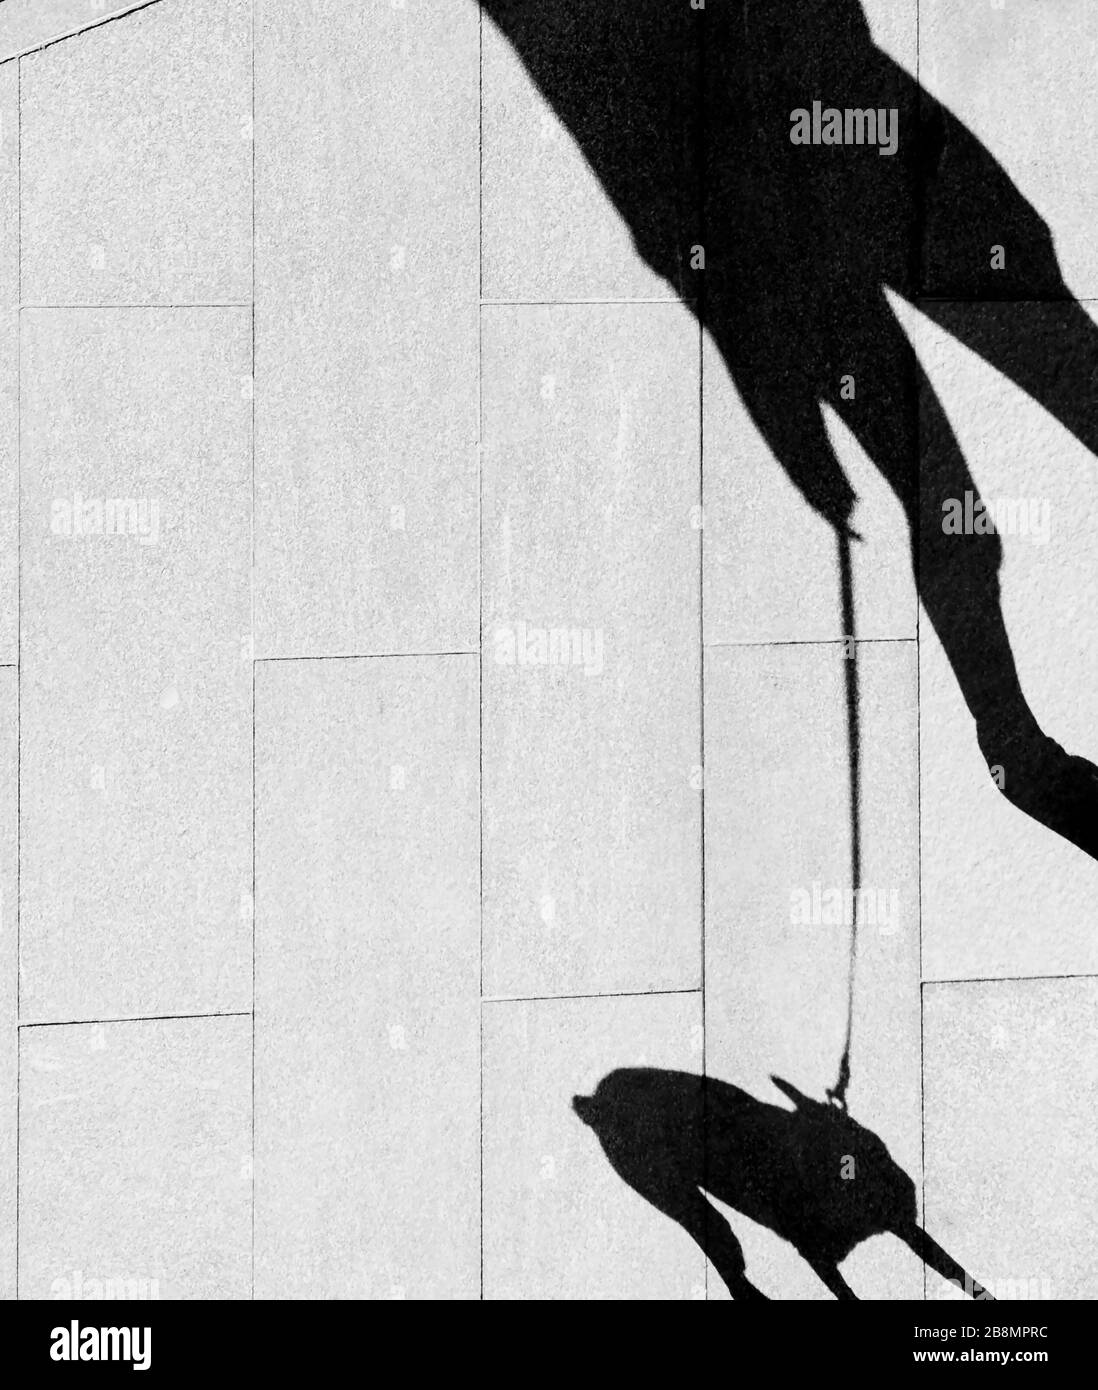 Shadow silhouette of a person walking a dog on a leash on city sidewalk, detail Stock Photo